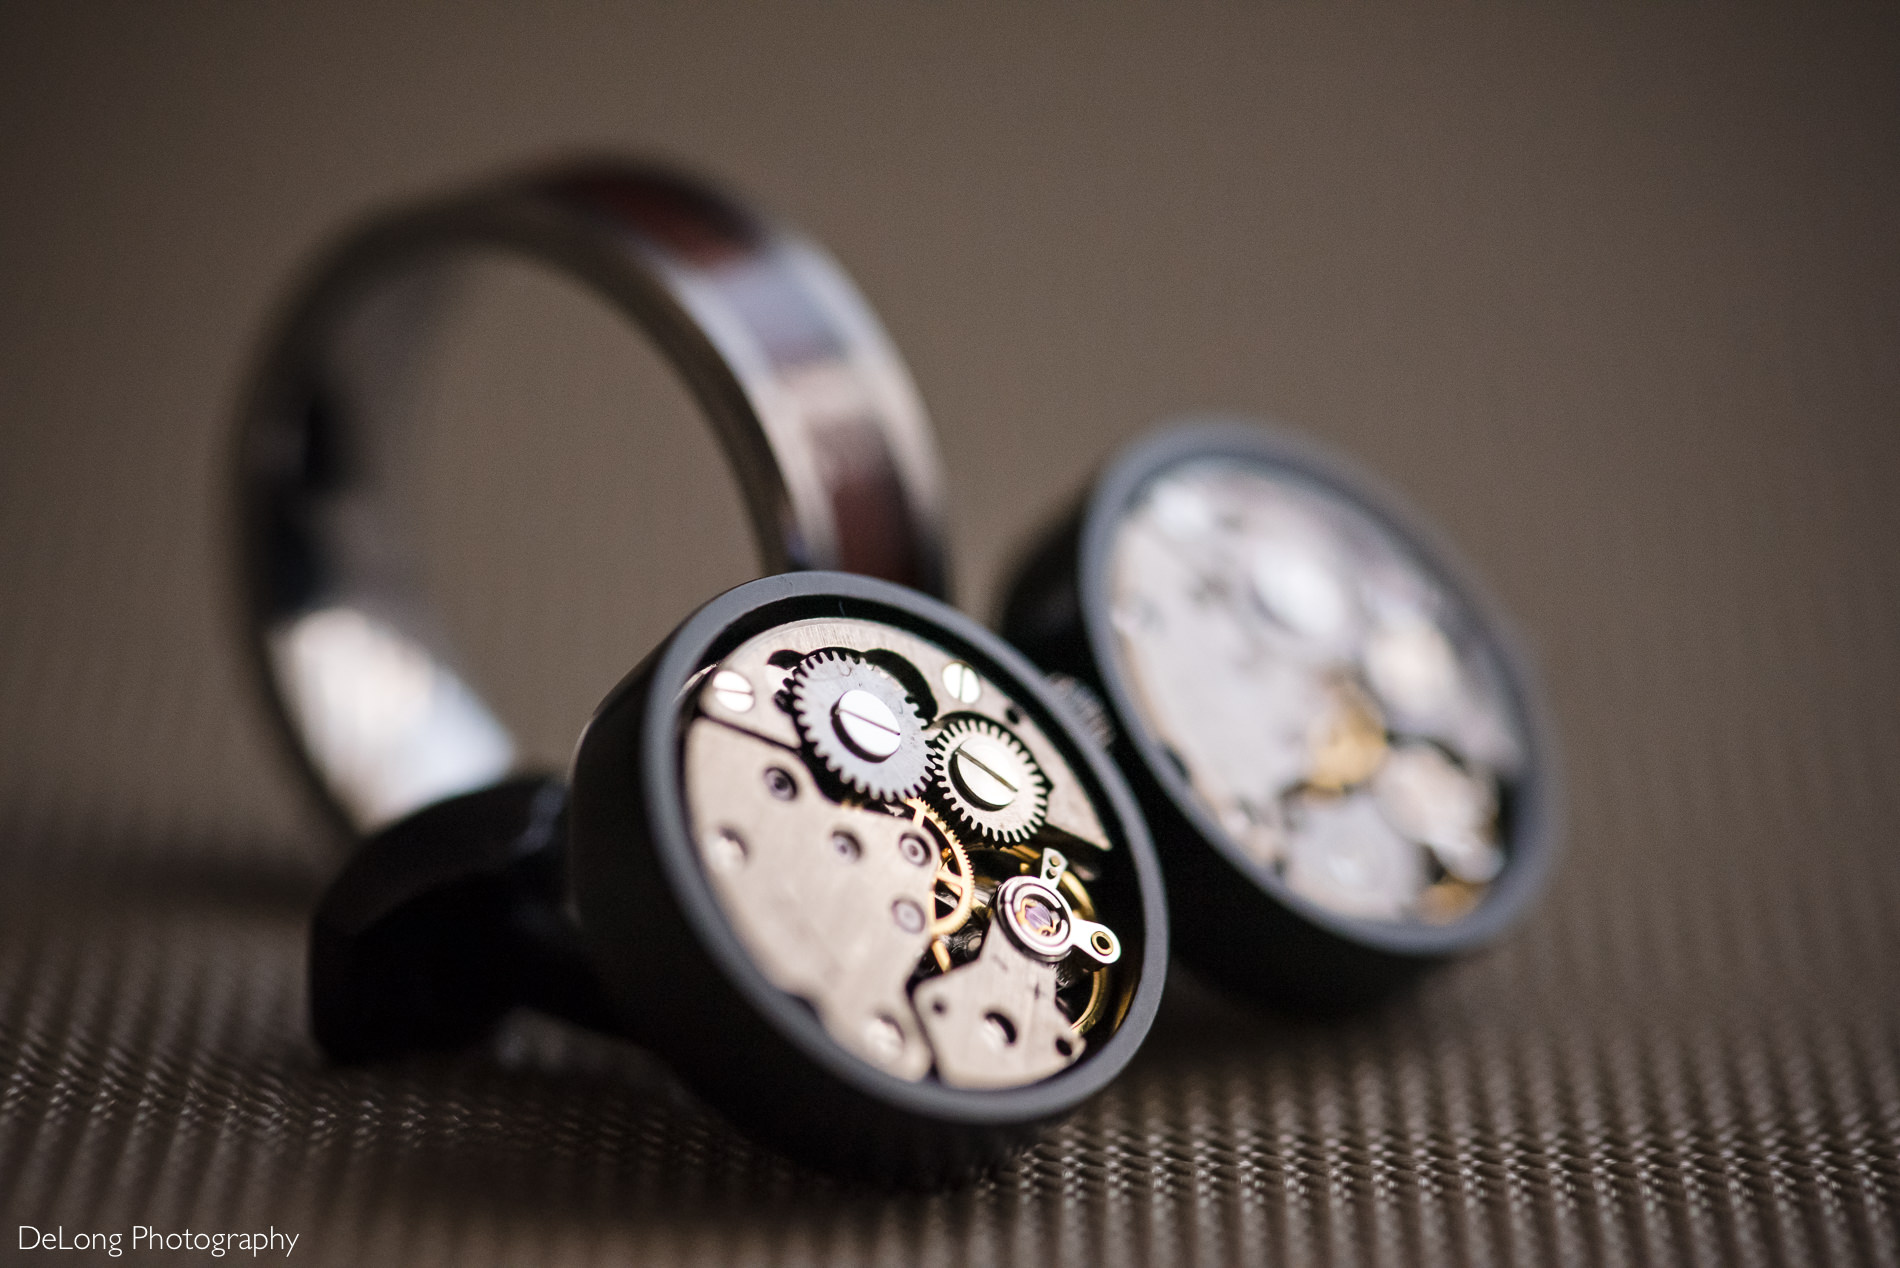 Groom's cufflink detail photo by Charlotte wedding photographers DeLong Photography